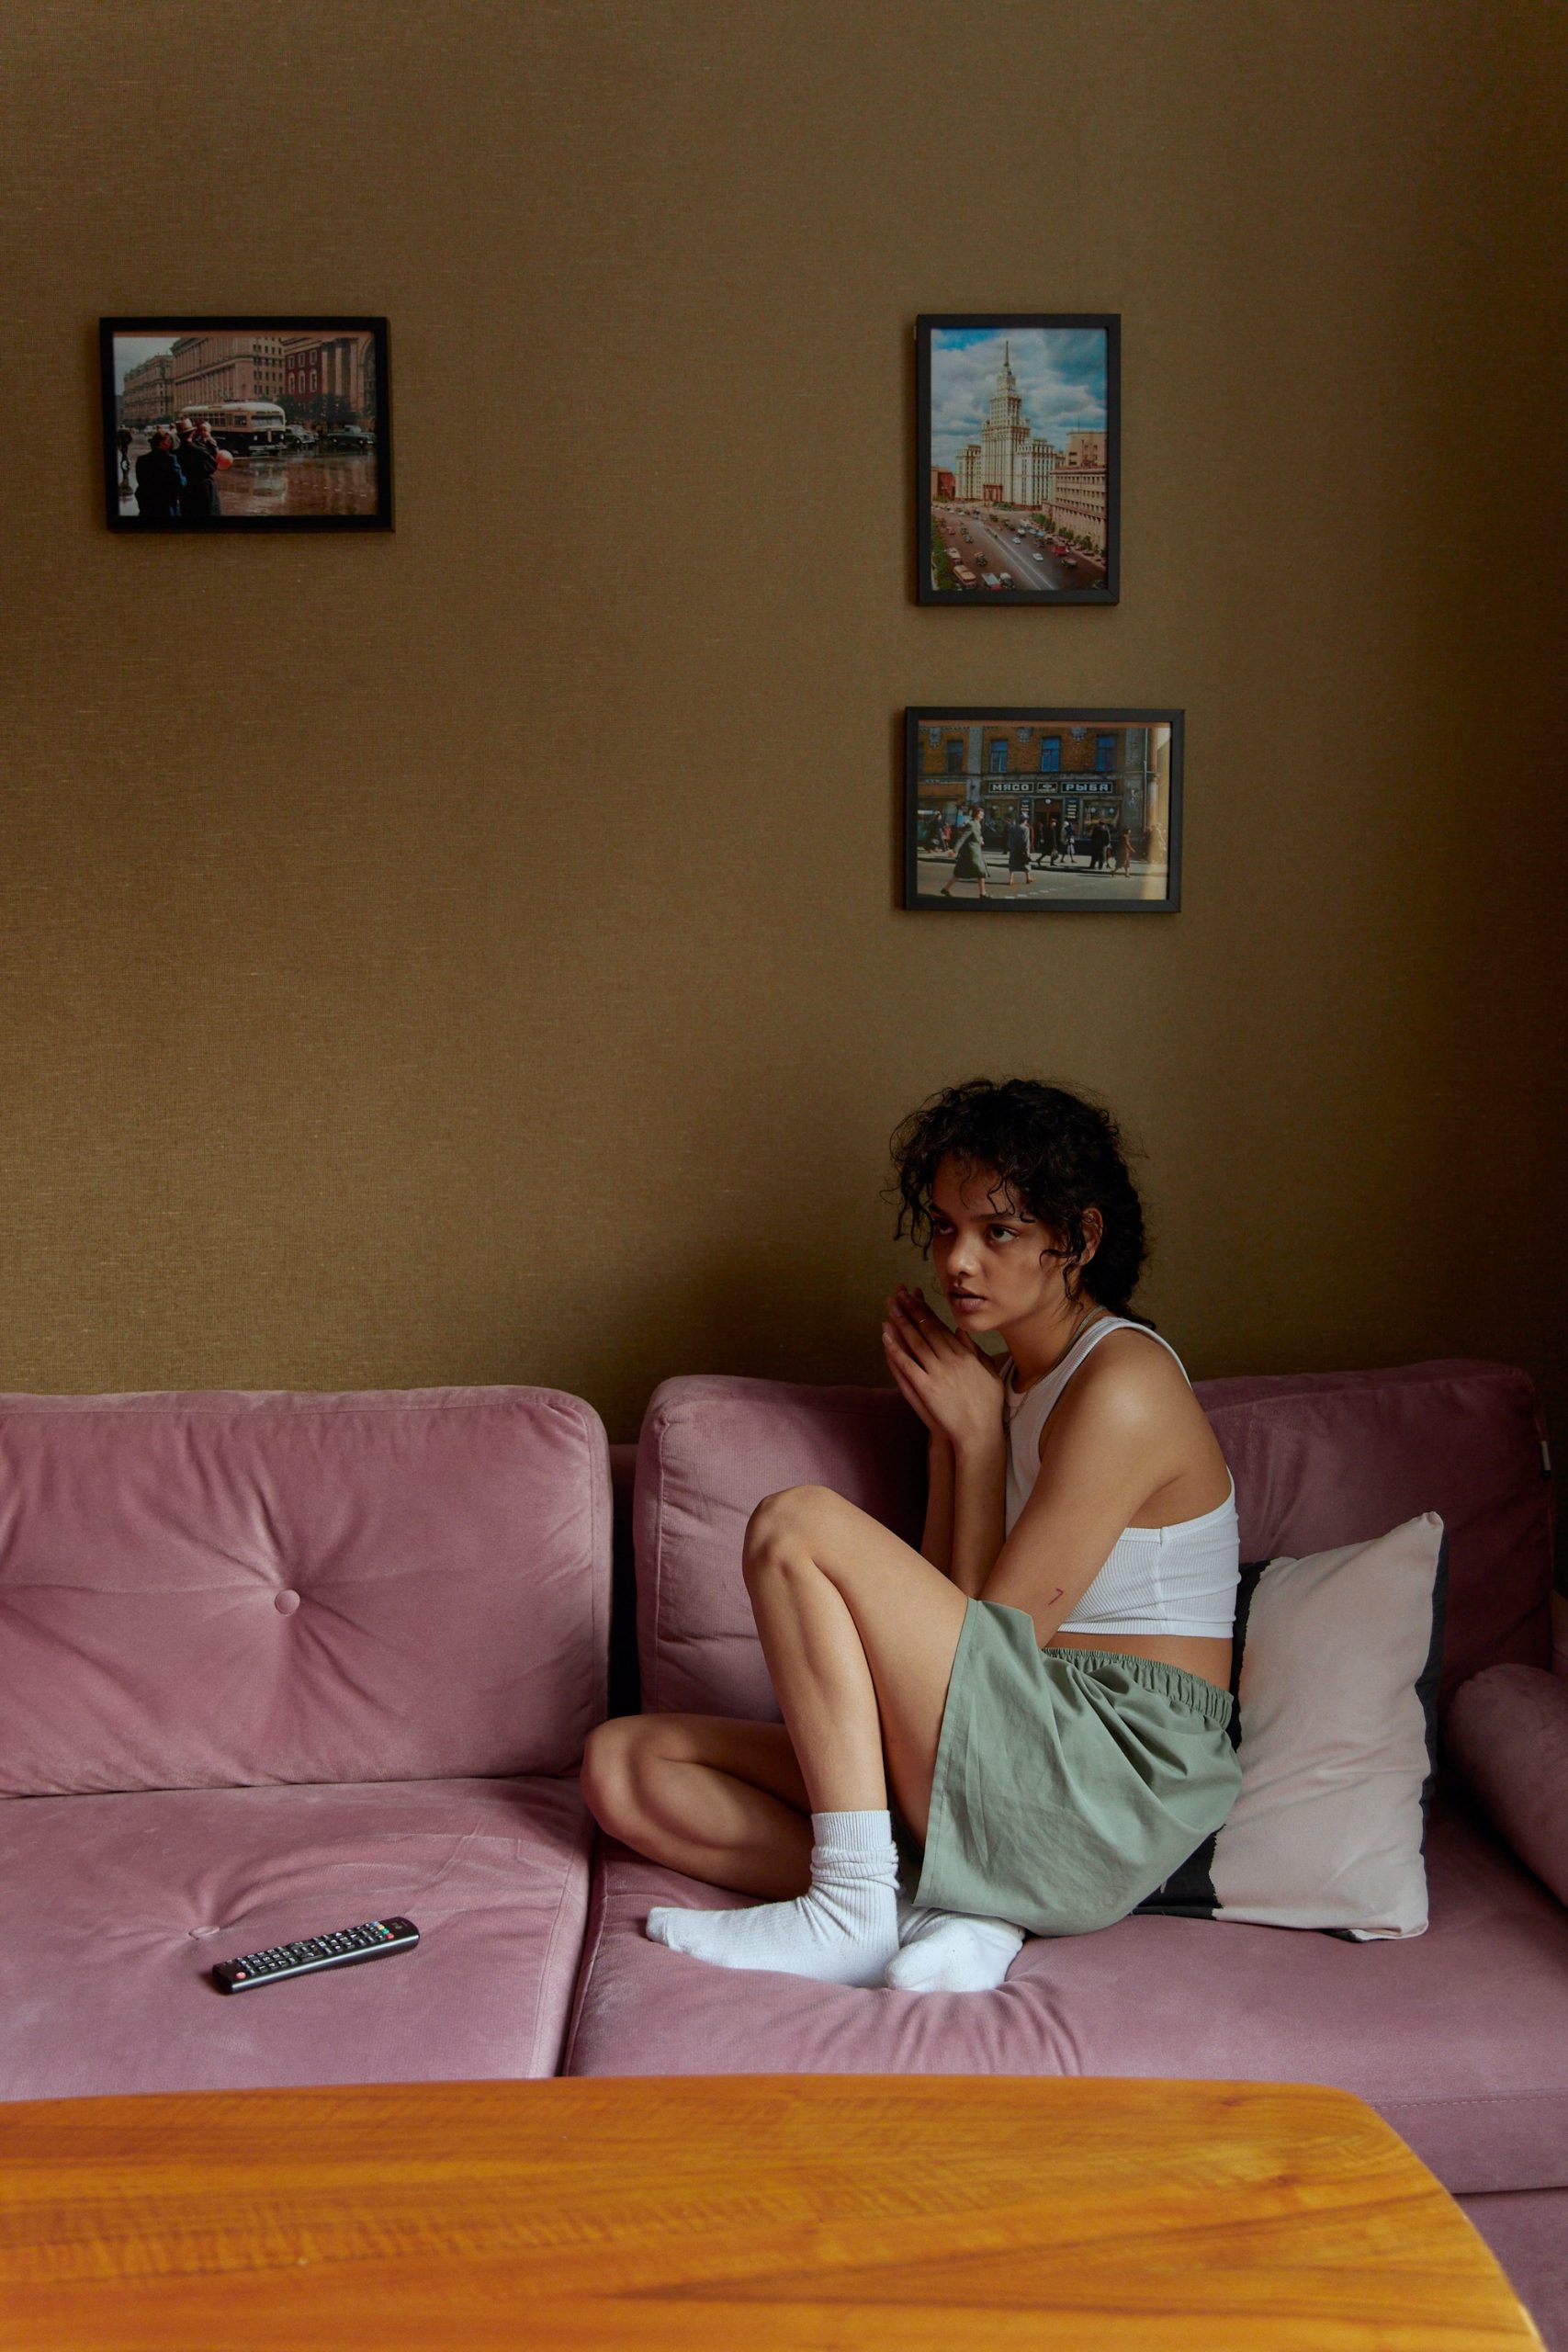 A young woman wears a crop top, shorts and white socks. She sits huddled up on a pink sofa looking pensieve.